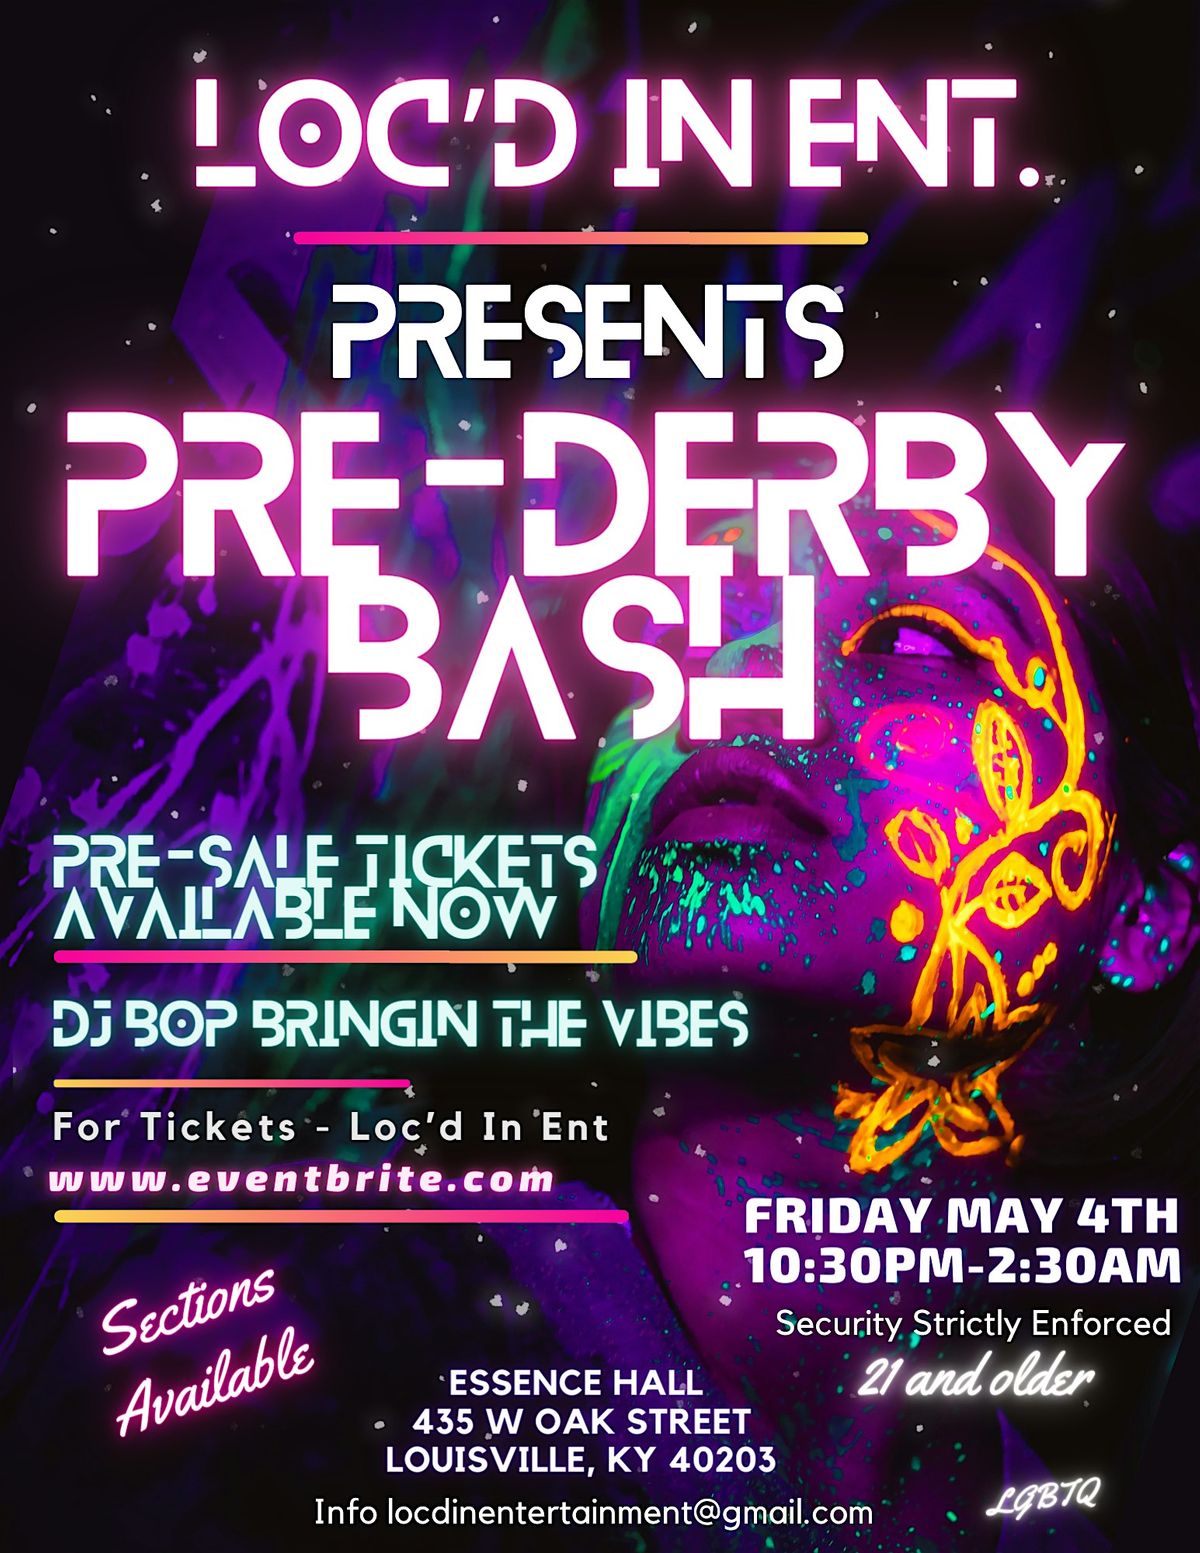 Loc'd In Ent Presents the "Pre-Derby Bash"